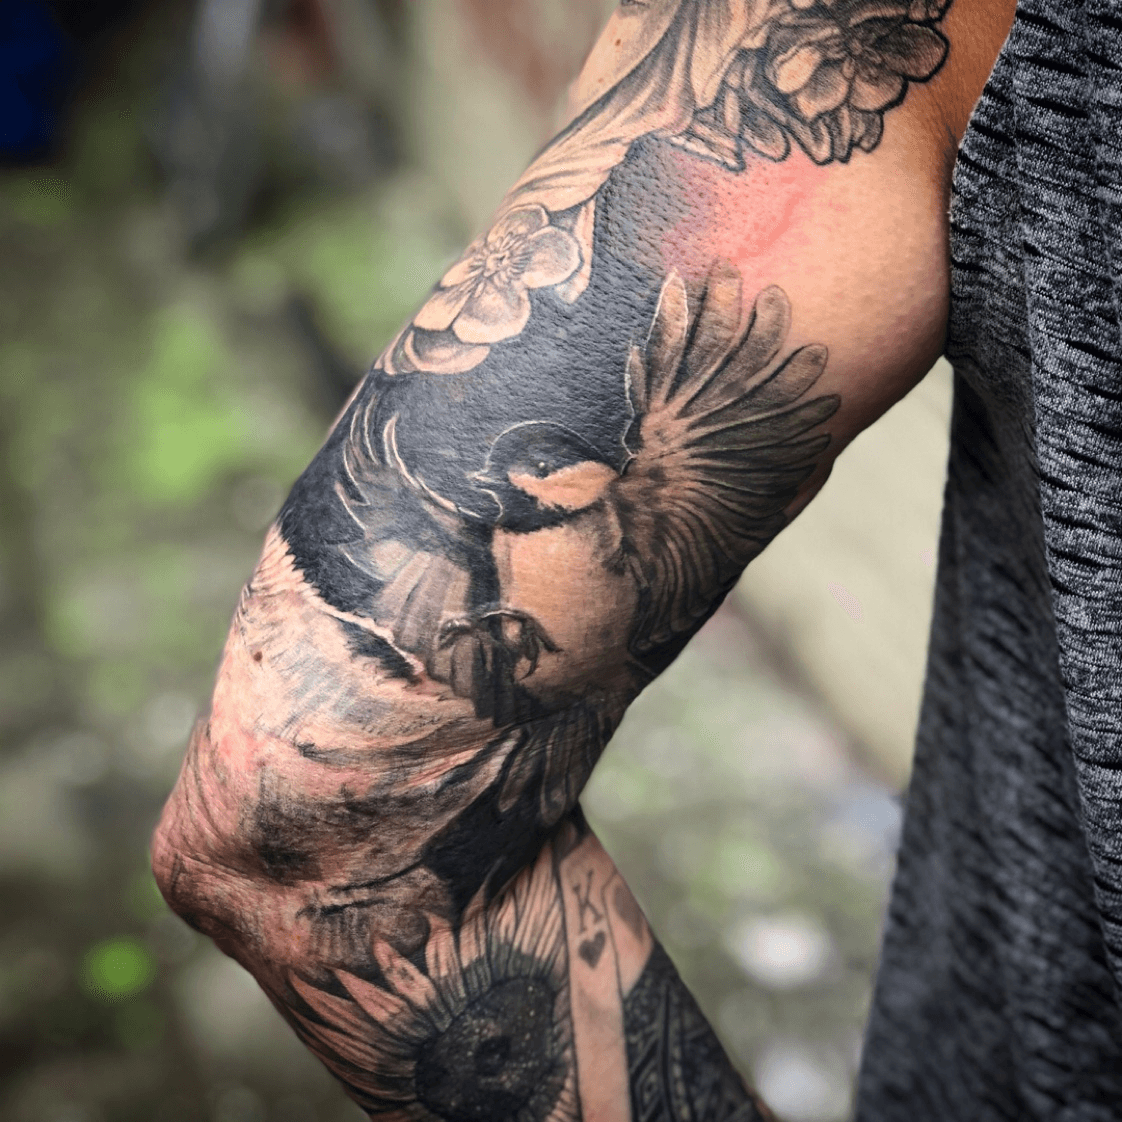 Tattoo uploaded by Lacarttattoo  Had much fun with this sick opaque gray  piece  Tattoodo